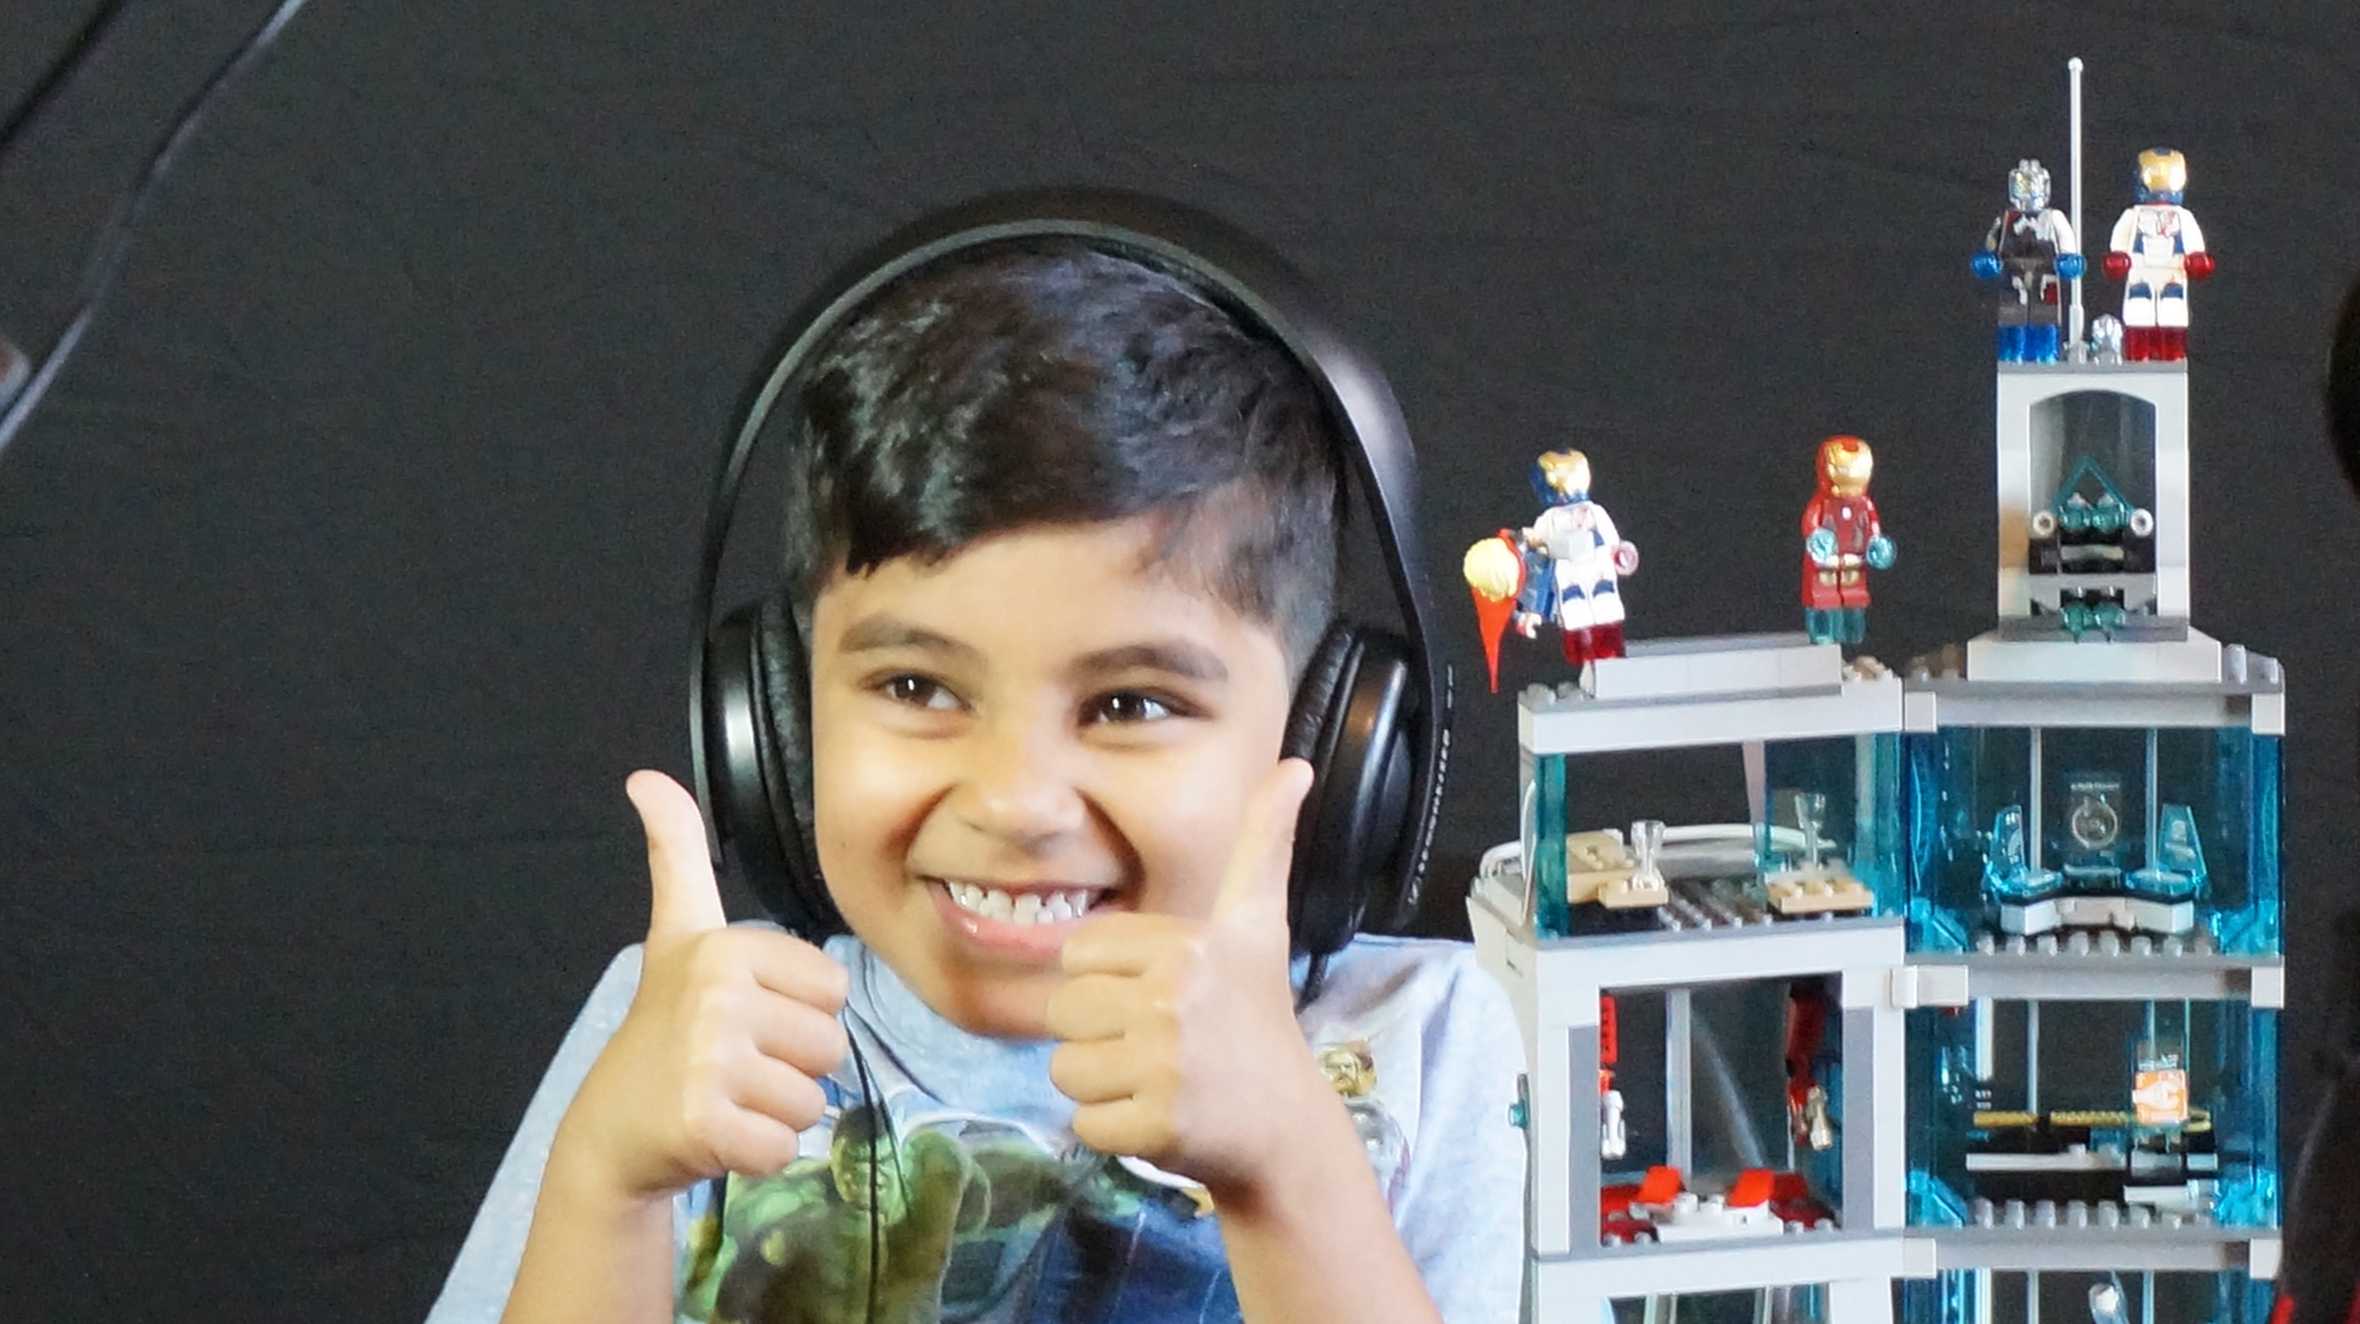 Khayyam with his thumbs up while filming his vlog